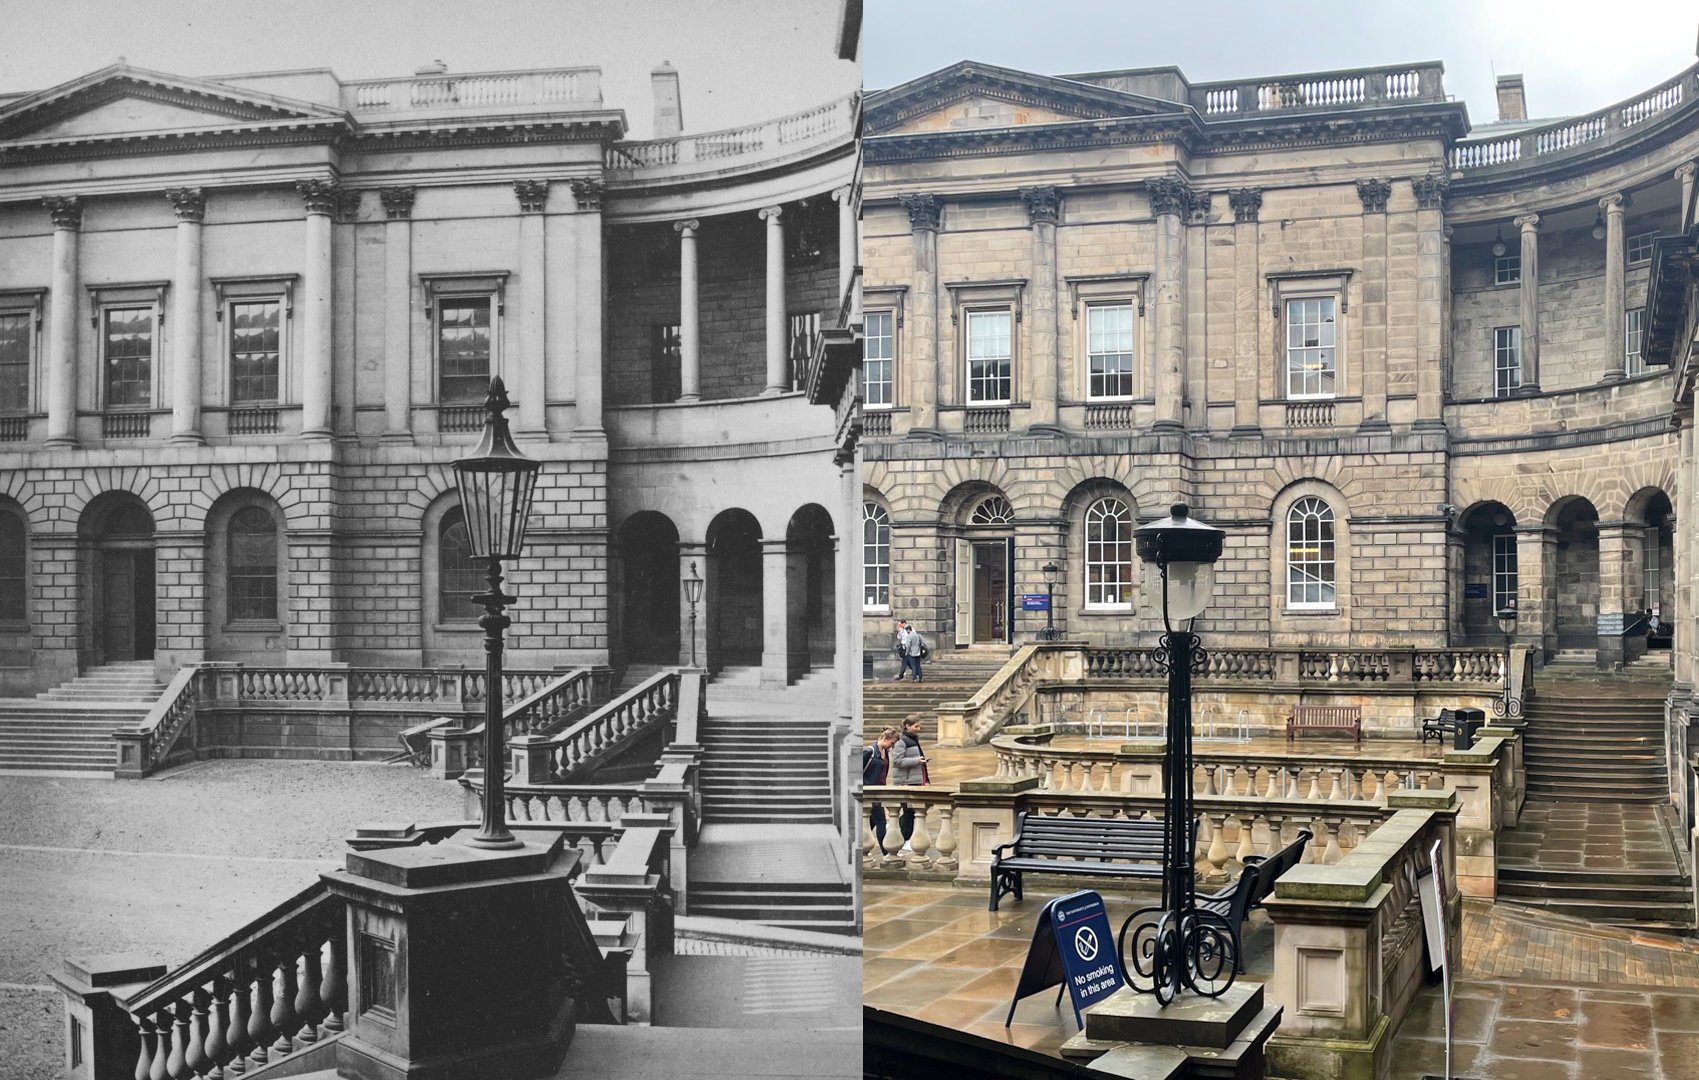 Old College at the University of Edinburgh in 1860s versus today